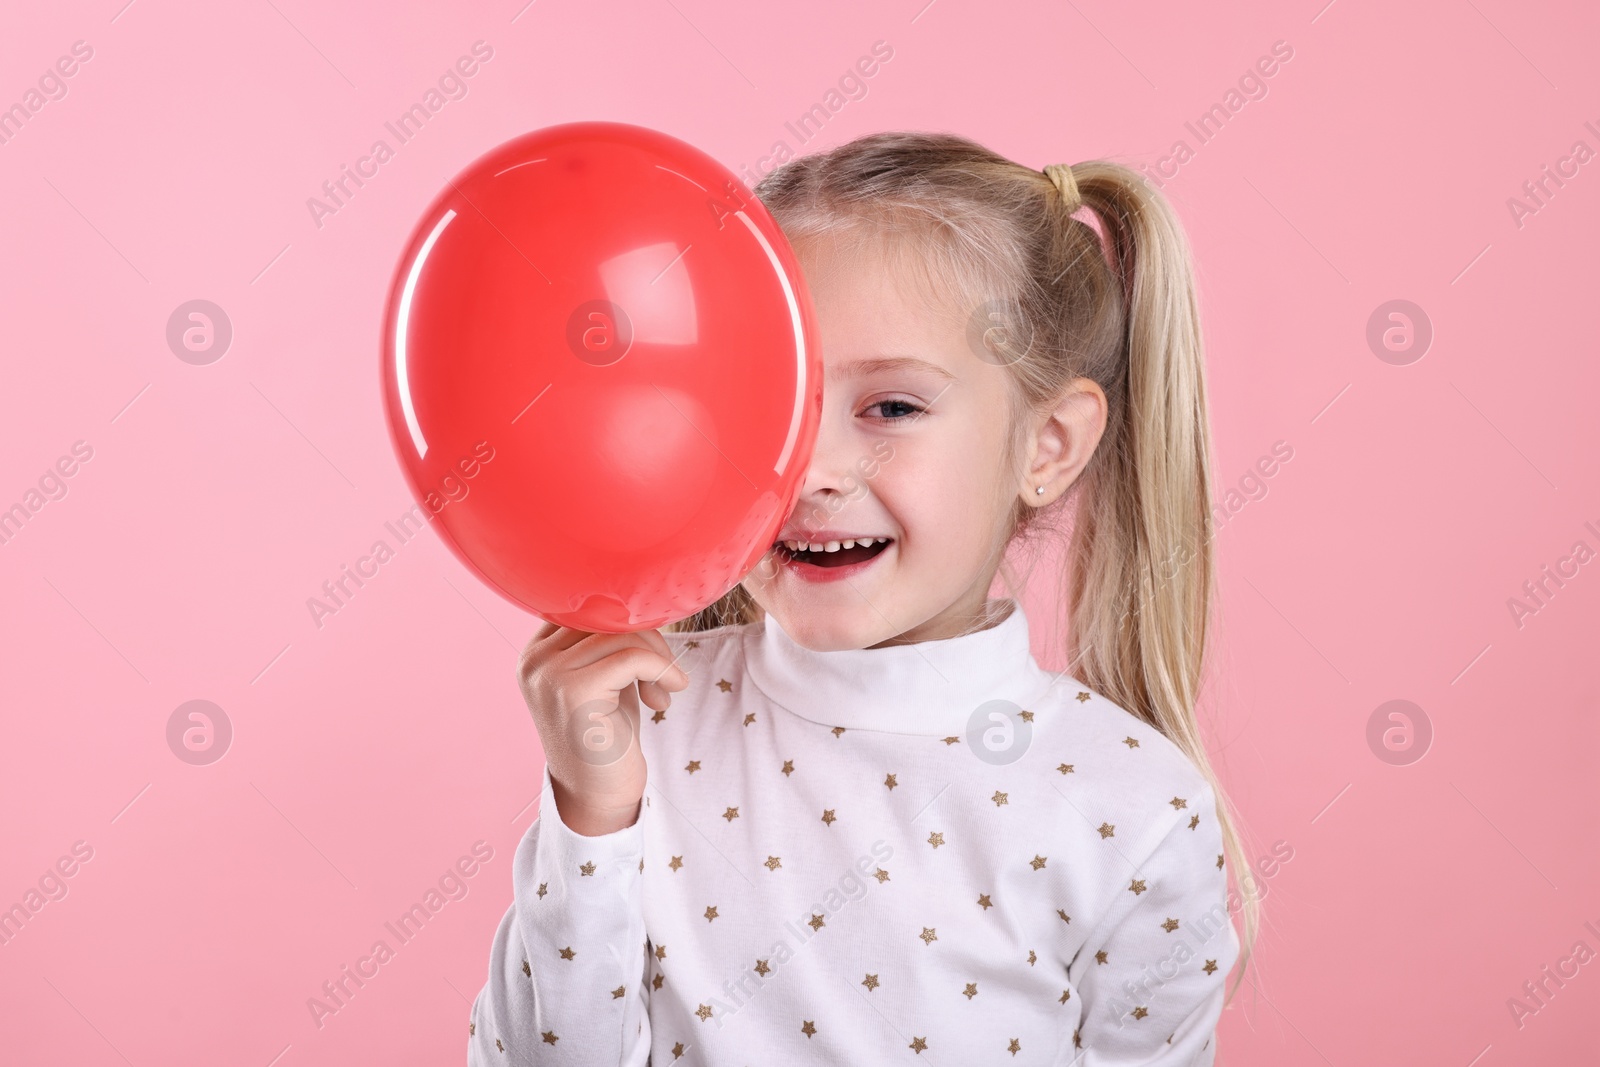 Photo of Cute little girl with red balloon on pink background